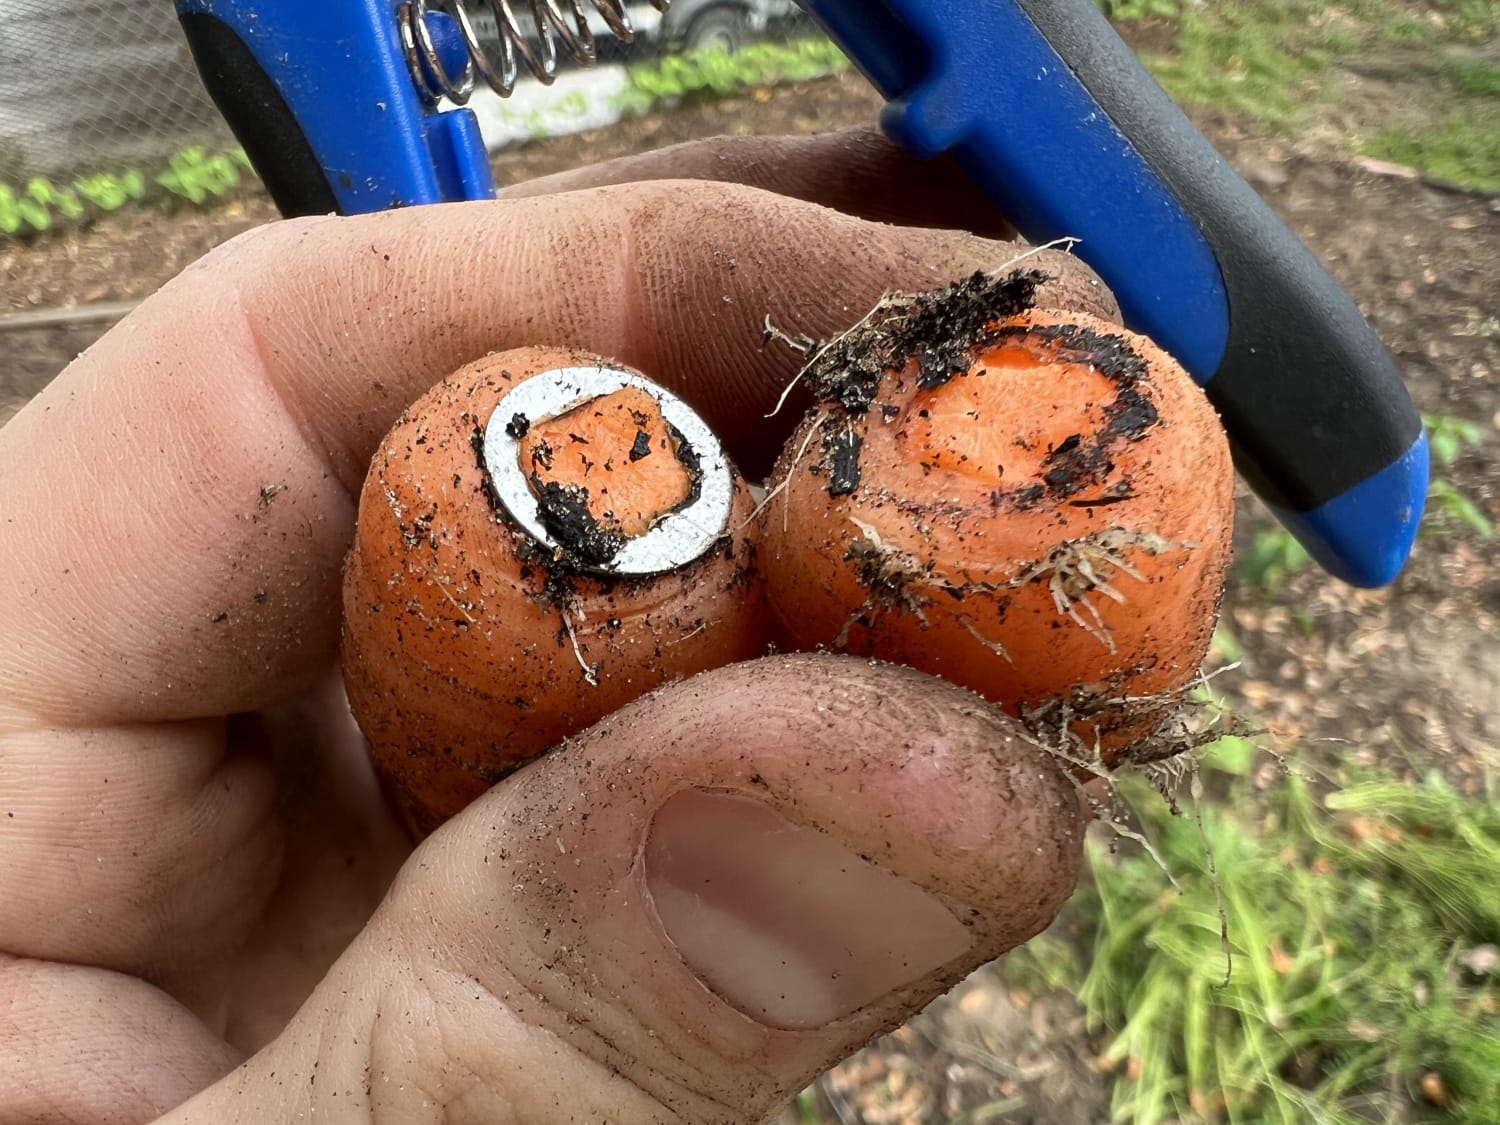 Picked a carrot and it had a funny pinch in it. Looks like it grew through a small washer. The joys of gardening in the backyard of a small city. I swear the amount of junk I find buried in the ground is astonishing. Old walkmans, DVDs, silverware, tons of nuts/bolts/screws/etc.